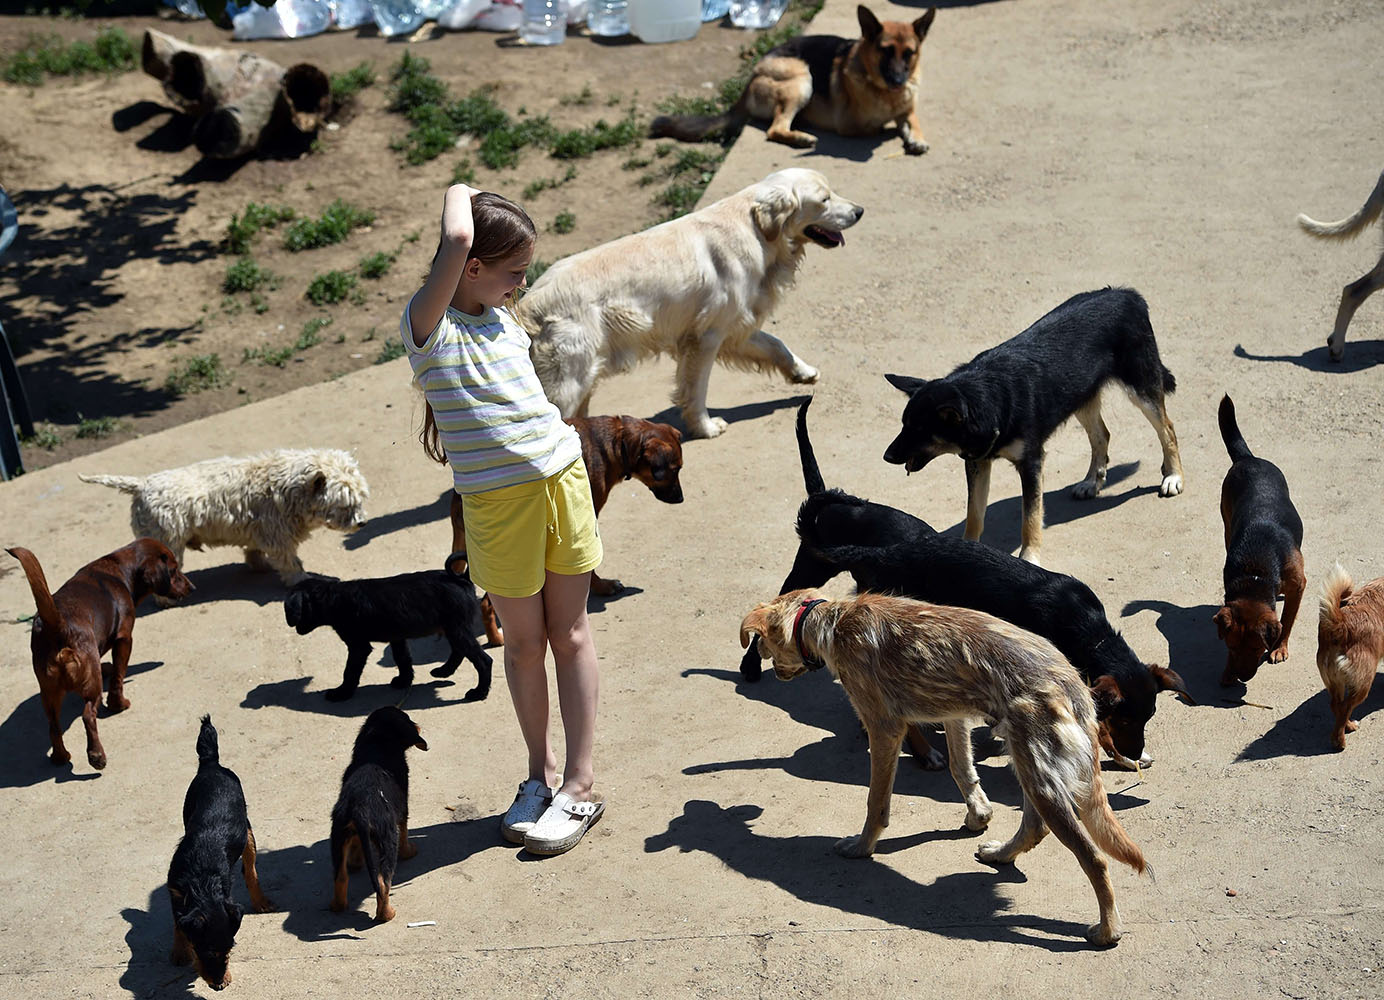 A child plays with rescued dogs in an animal shelter in the village of Drazevac near the flooded Serbian town of Obrenovac, on May 21, 2014.